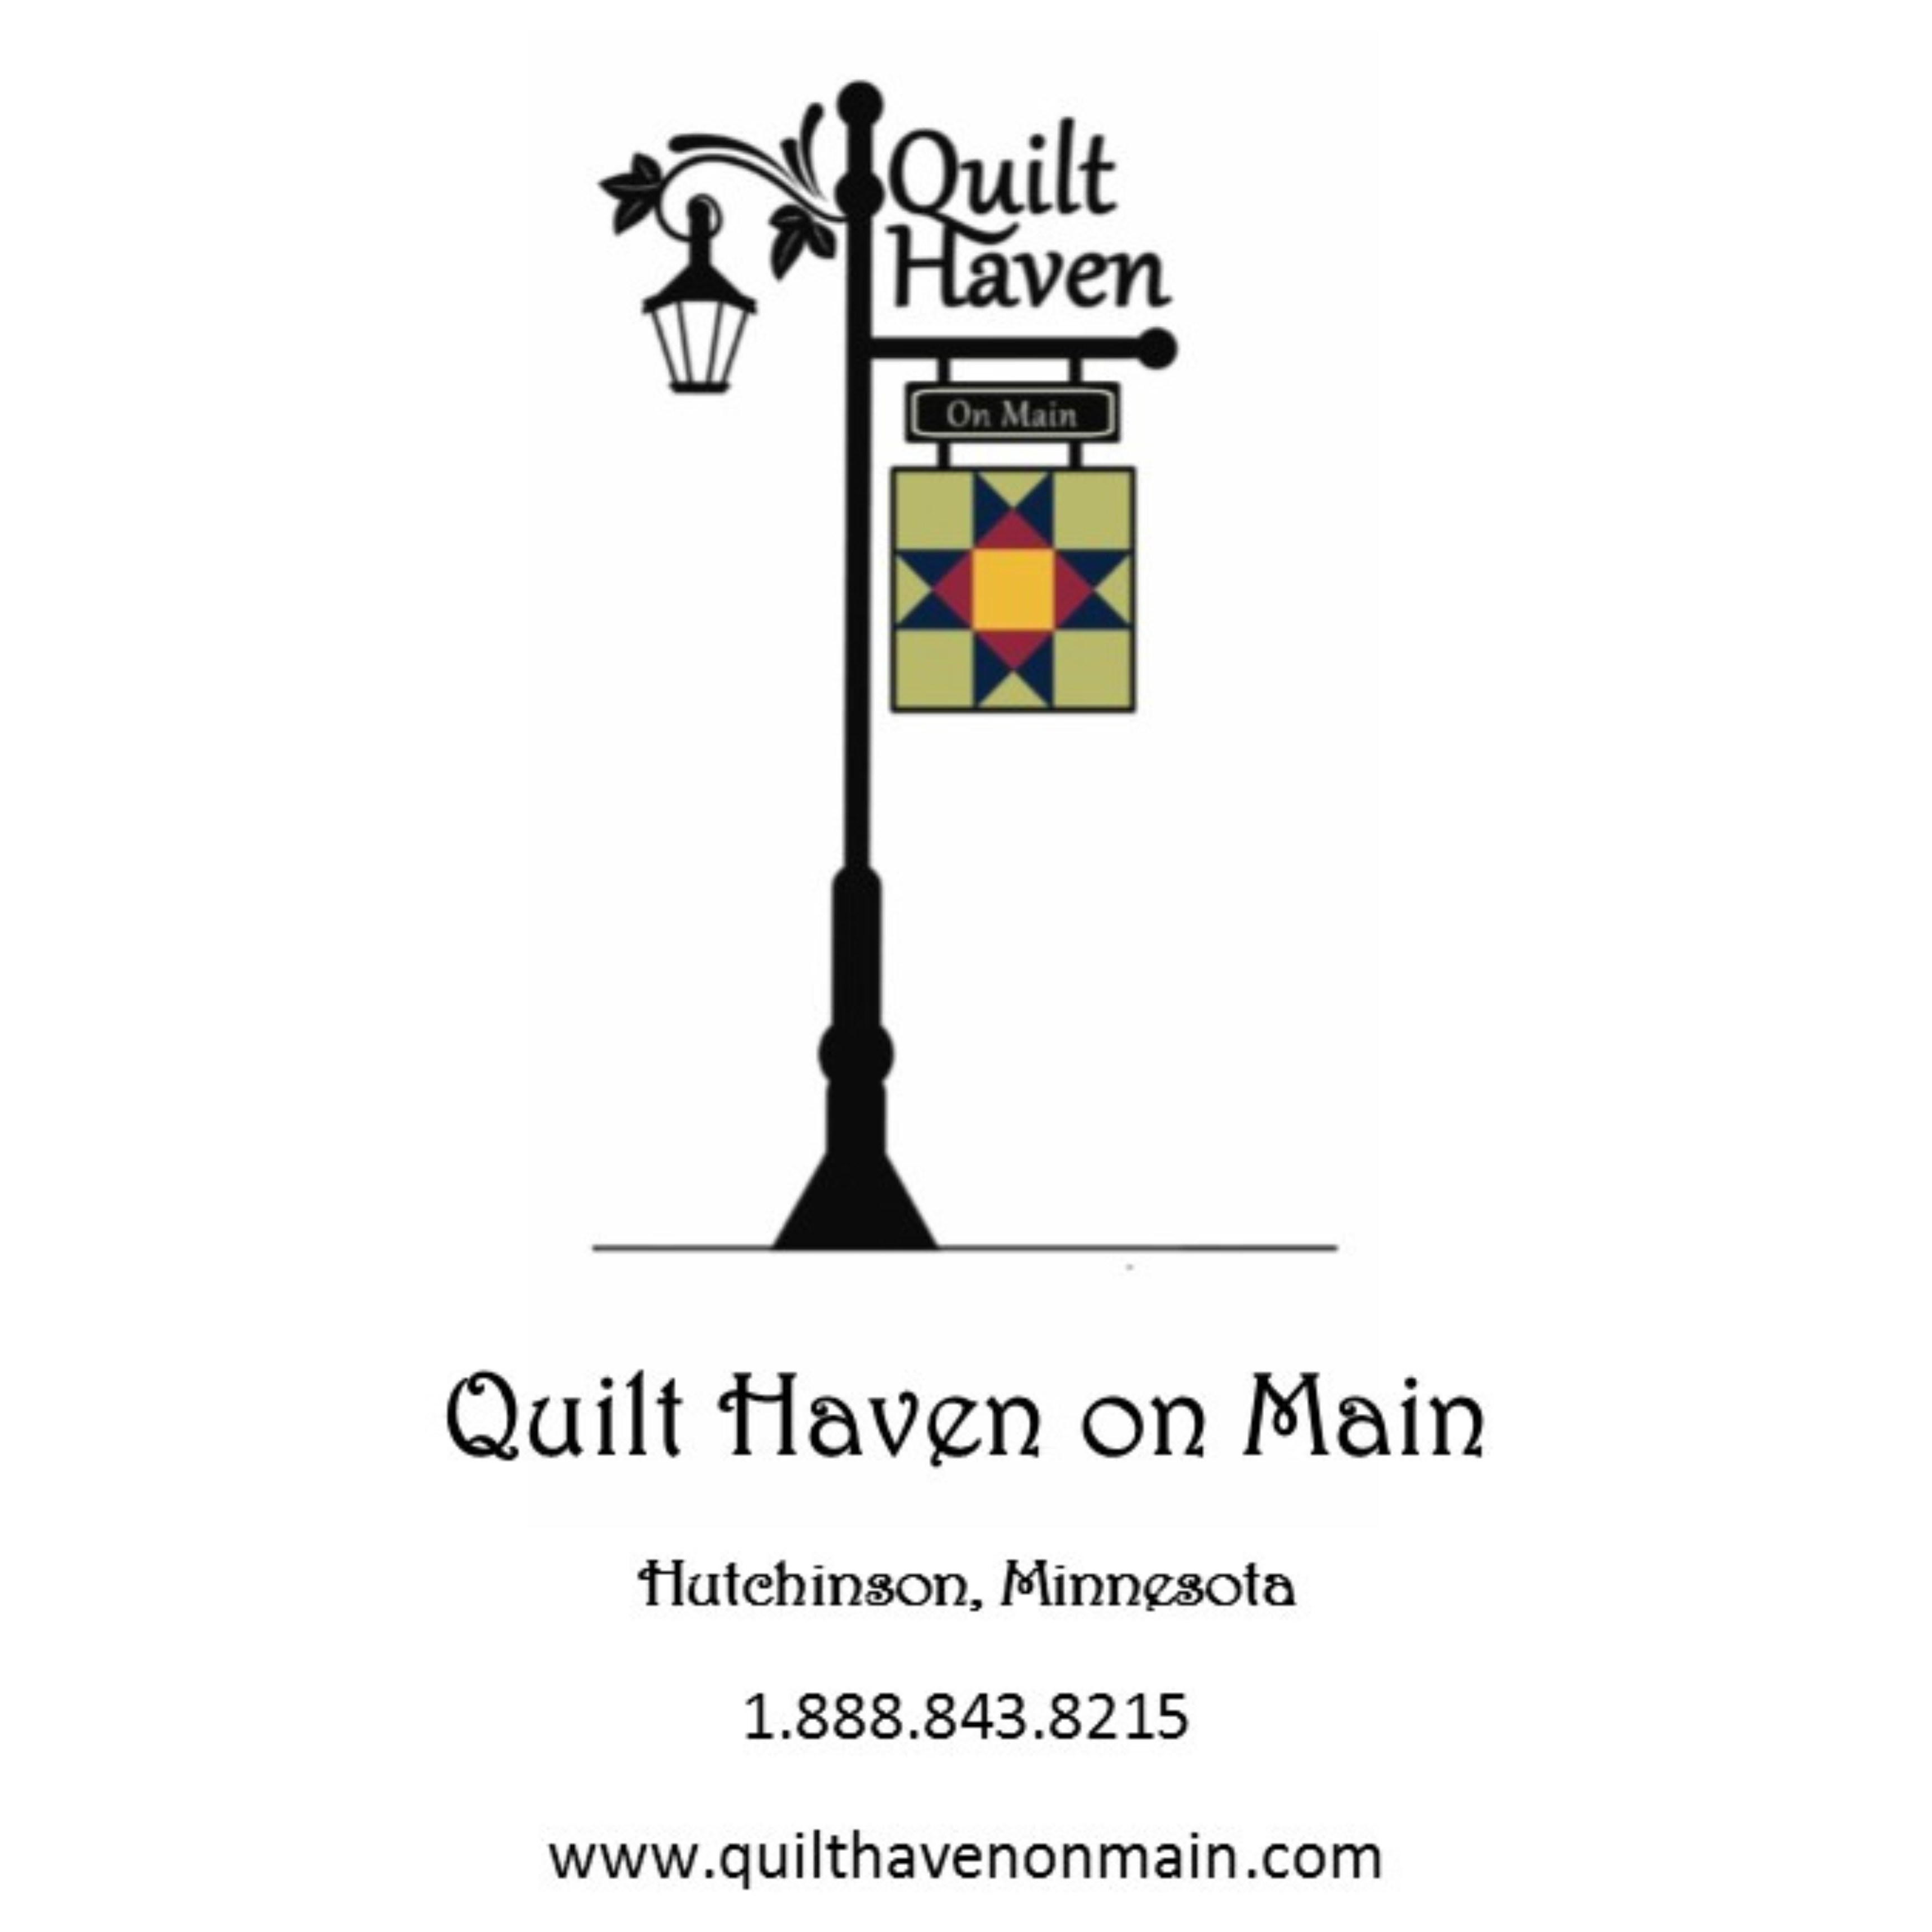 Quilt Haven on Main